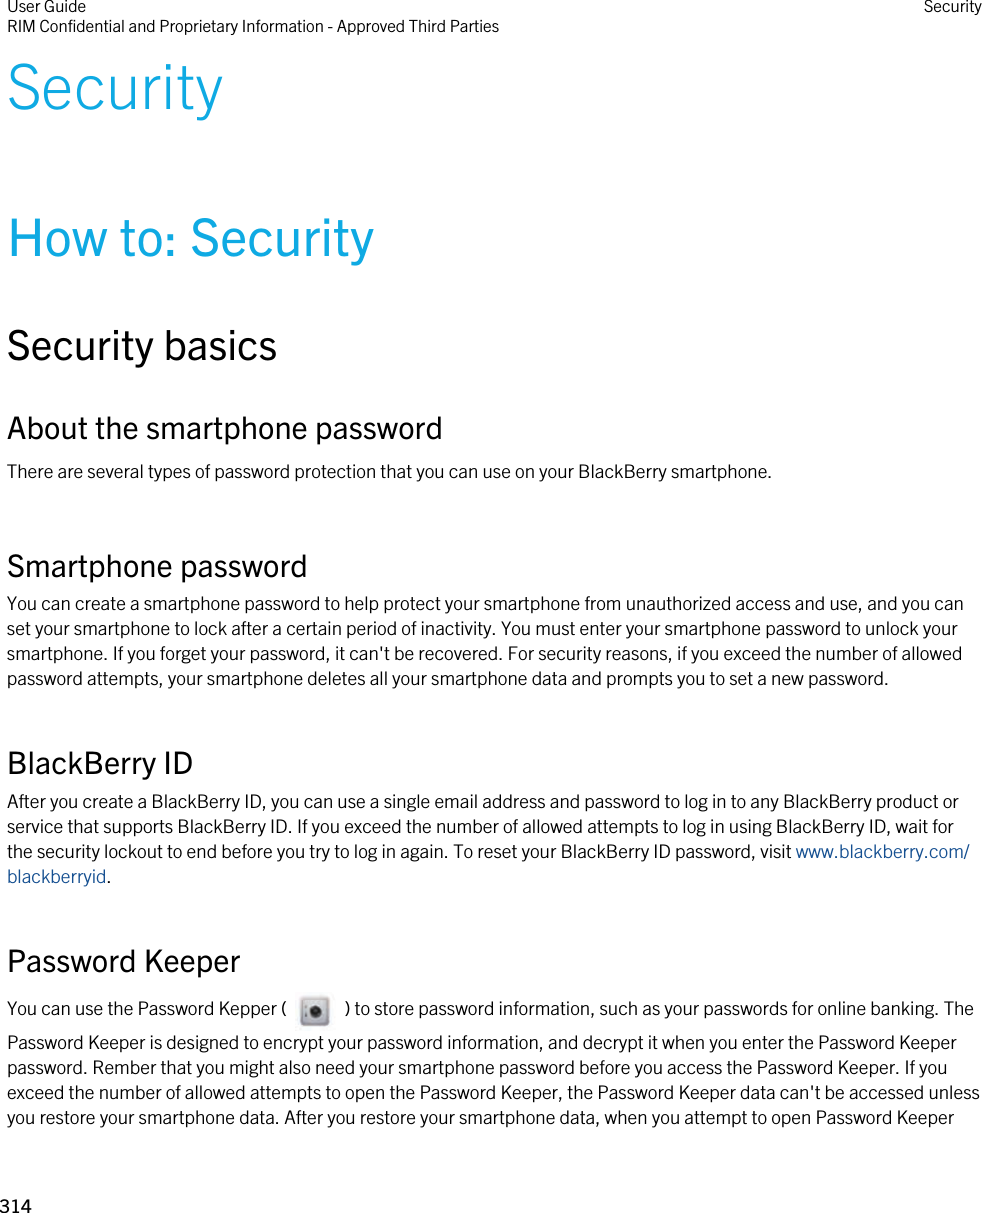 SecurityHow to: SecuritySecurity basicsAbout the smartphone passwordThere are several types of password protection that you can use on your BlackBerry smartphone.Smartphone passwordYou can create a smartphone password to help protect your smartphone from unauthorized access and use, and you can set your smartphone to lock after a certain period of inactivity. You must enter your smartphone password to unlock your smartphone. If you forget your password, it can&apos;t be recovered. For security reasons, if you exceed the number of allowed password attempts, your smartphone deletes all your smartphone data and prompts you to set a new password.BlackBerry IDAfter you create a BlackBerry ID, you can use a single email address and password to log in to any BlackBerry product or service that supports BlackBerry ID. If you exceed the number of allowed attempts to log in using BlackBerry ID, wait for the security lockout to end before you try to log in again. To reset your BlackBerry ID password, visit www.blackberry.com/blackberryid.Password KeeperYou can use the Password Kepper (     ) to store password information, such as your passwords for online banking. The Password Keeper is designed to encrypt your password information, and decrypt it when you enter the Password Keeper password. Rember that you might also need your smartphone password before you access the Password Keeper. If you exceed the number of allowed attempts to open the Password Keeper, the Password Keeper data can&apos;t be accessed unless you restore your smartphone data. After you restore your smartphone data, when you attempt to open Password Keeper User GuideRIM Confidential and Proprietary Information - Approved Third Parties Security314 